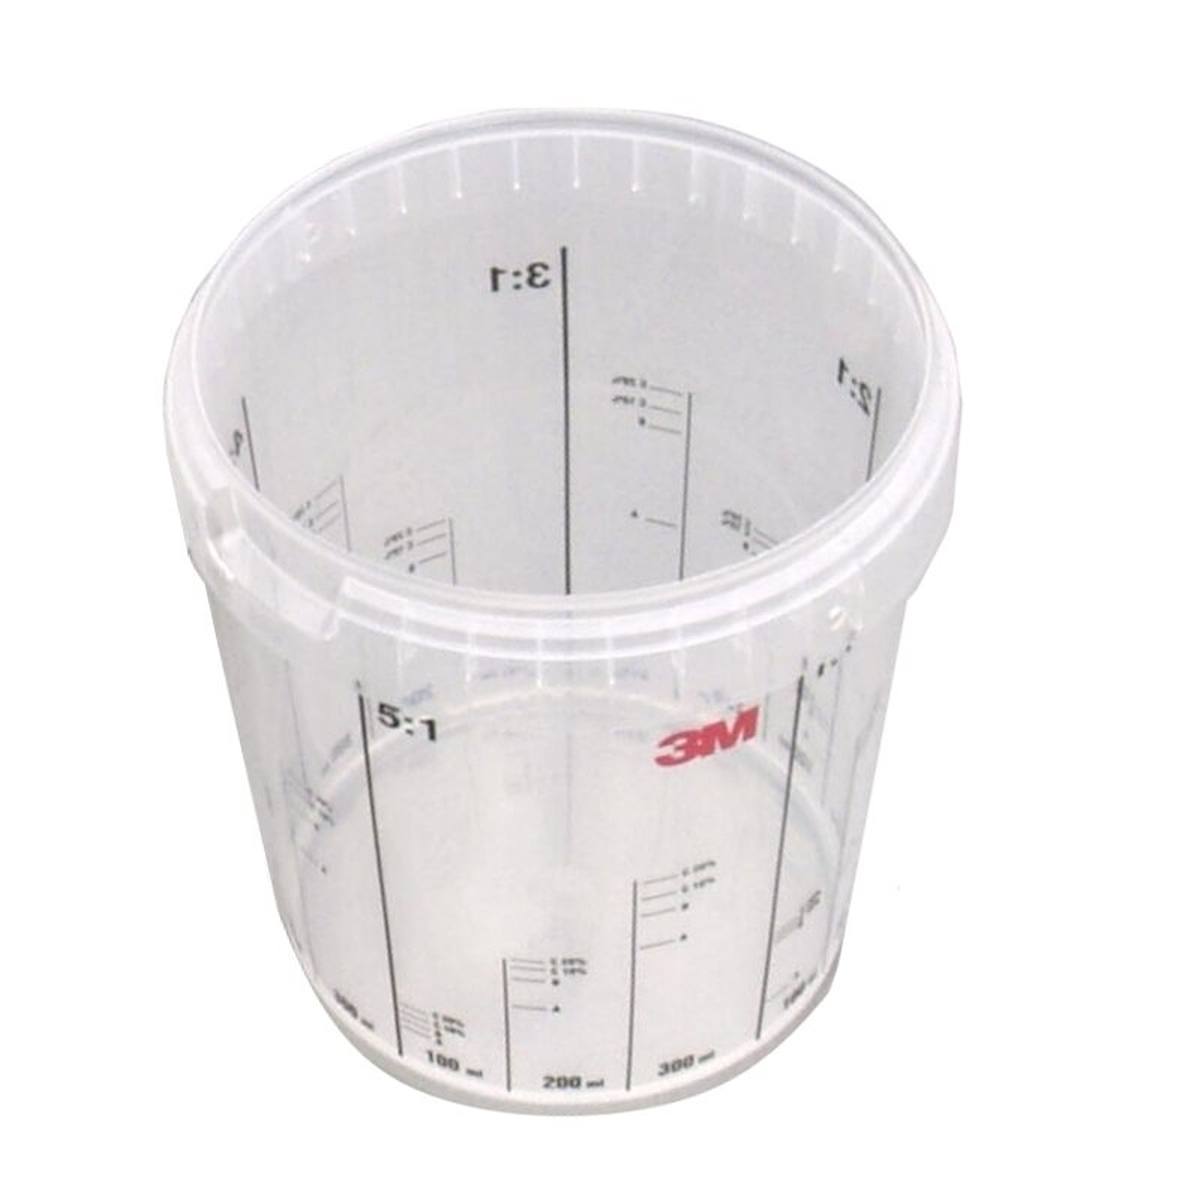 3M Mixing cup, 1,550 ml 90 pieces / pack